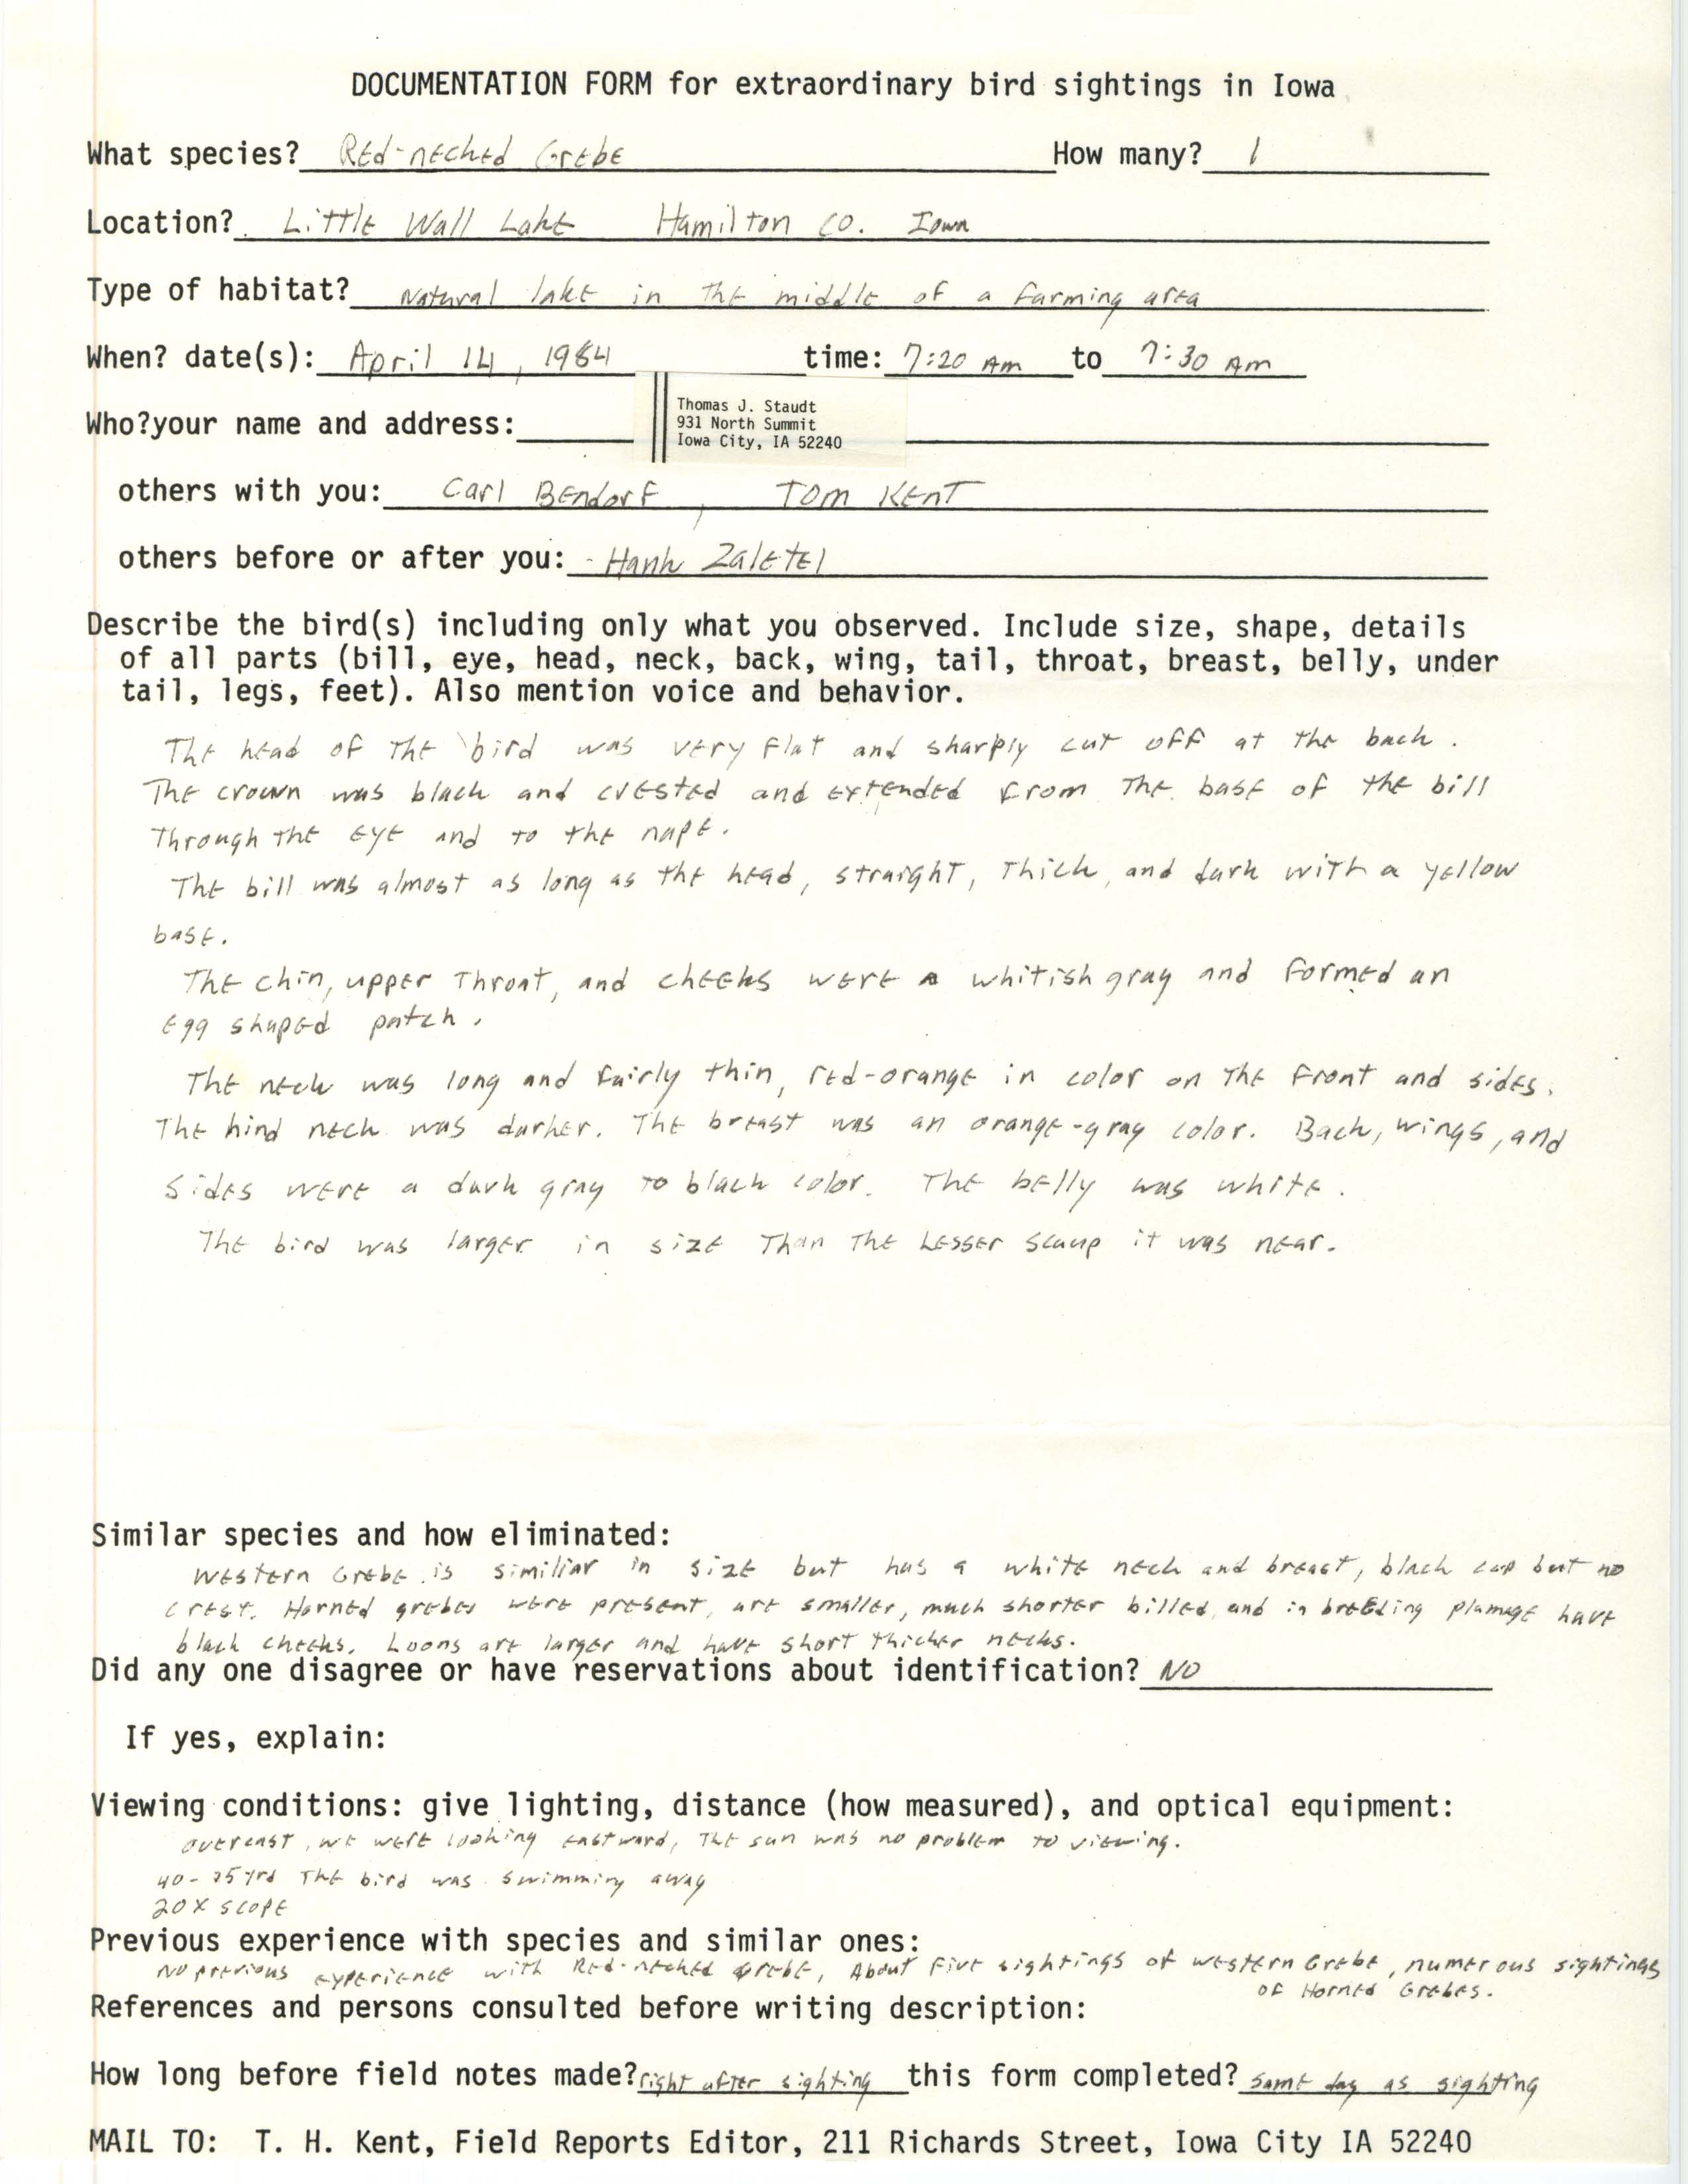 Rare bird documentation form for Red-necked Grebe at Little Wall Lake, 1984